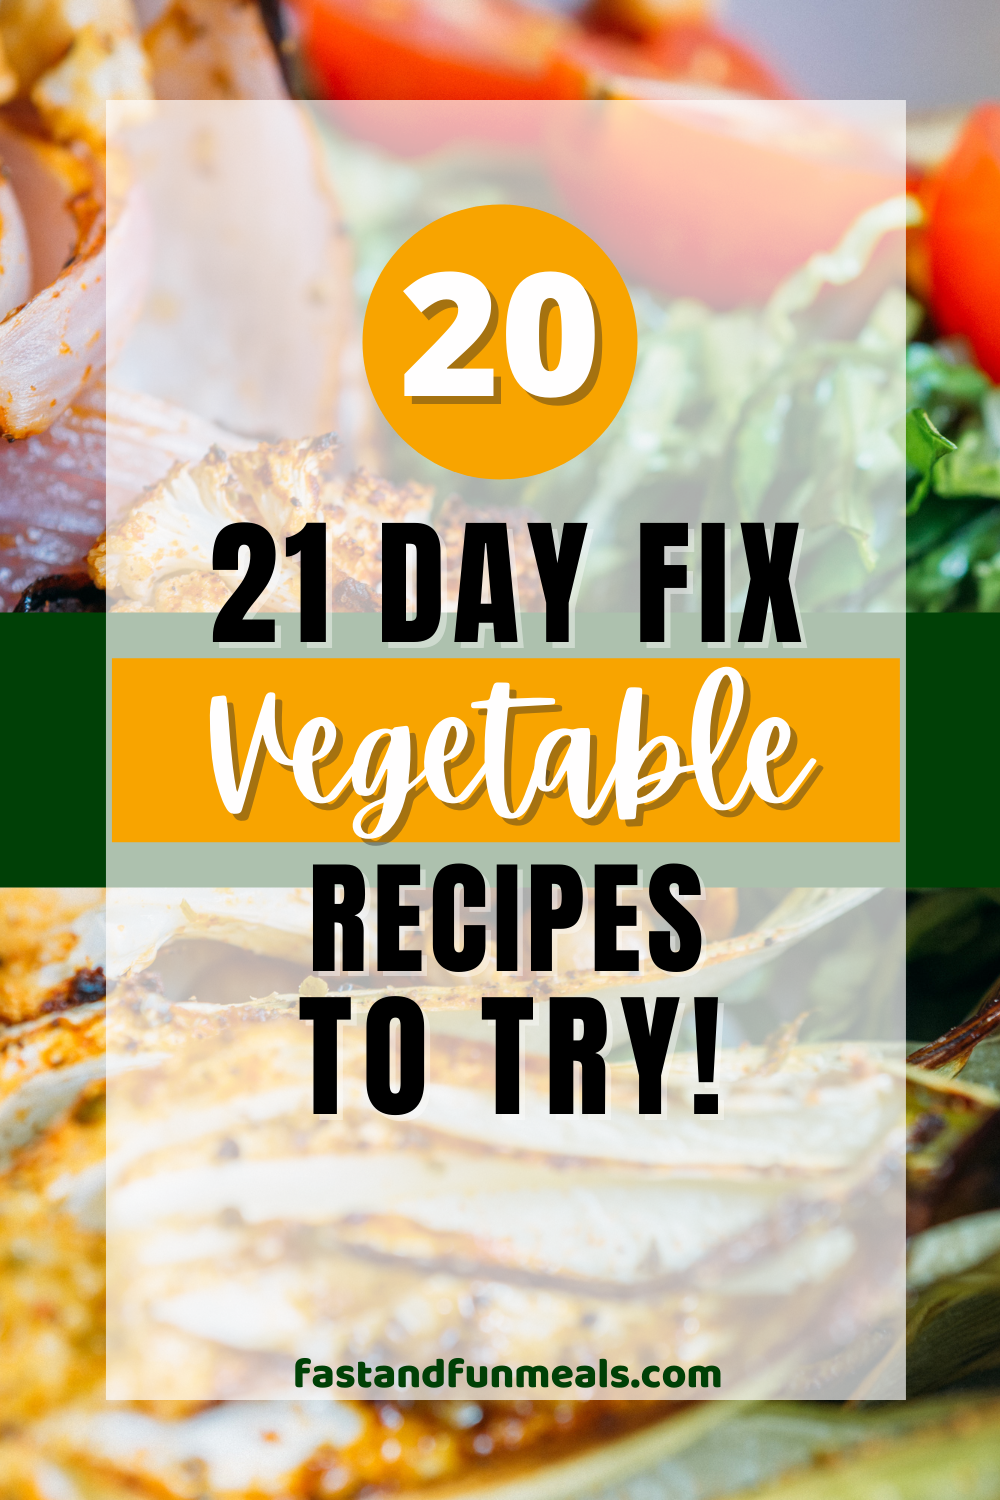 Pin showing the title 21 Day Fix Vegetable Recipes To Try!